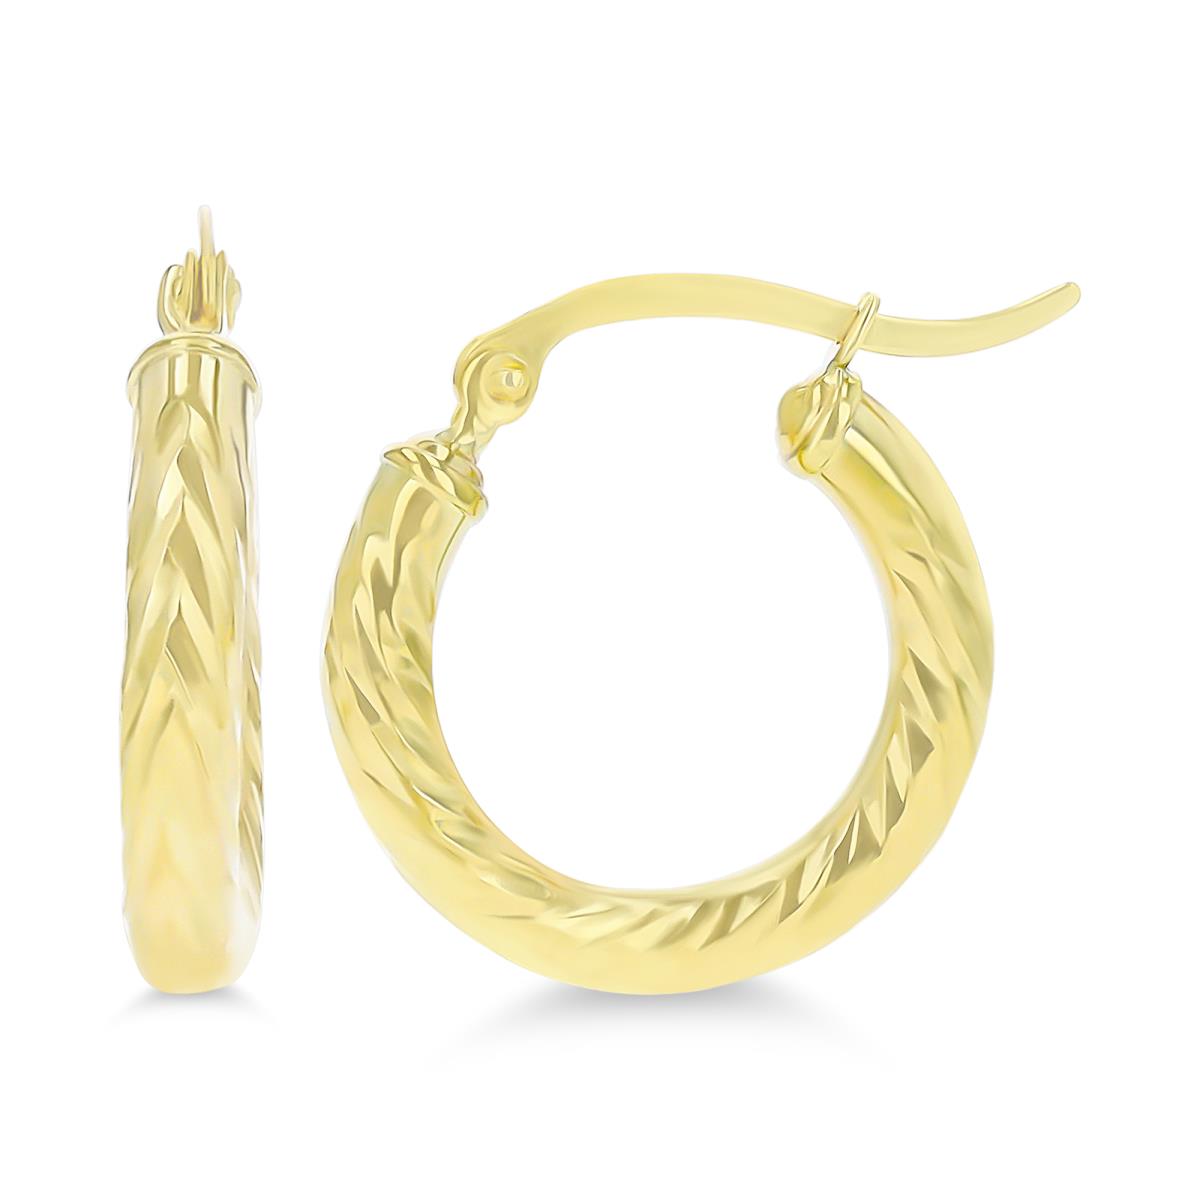 14K Yellow Gold 20x3mm (0.75") Twisted DC Hoop Earring